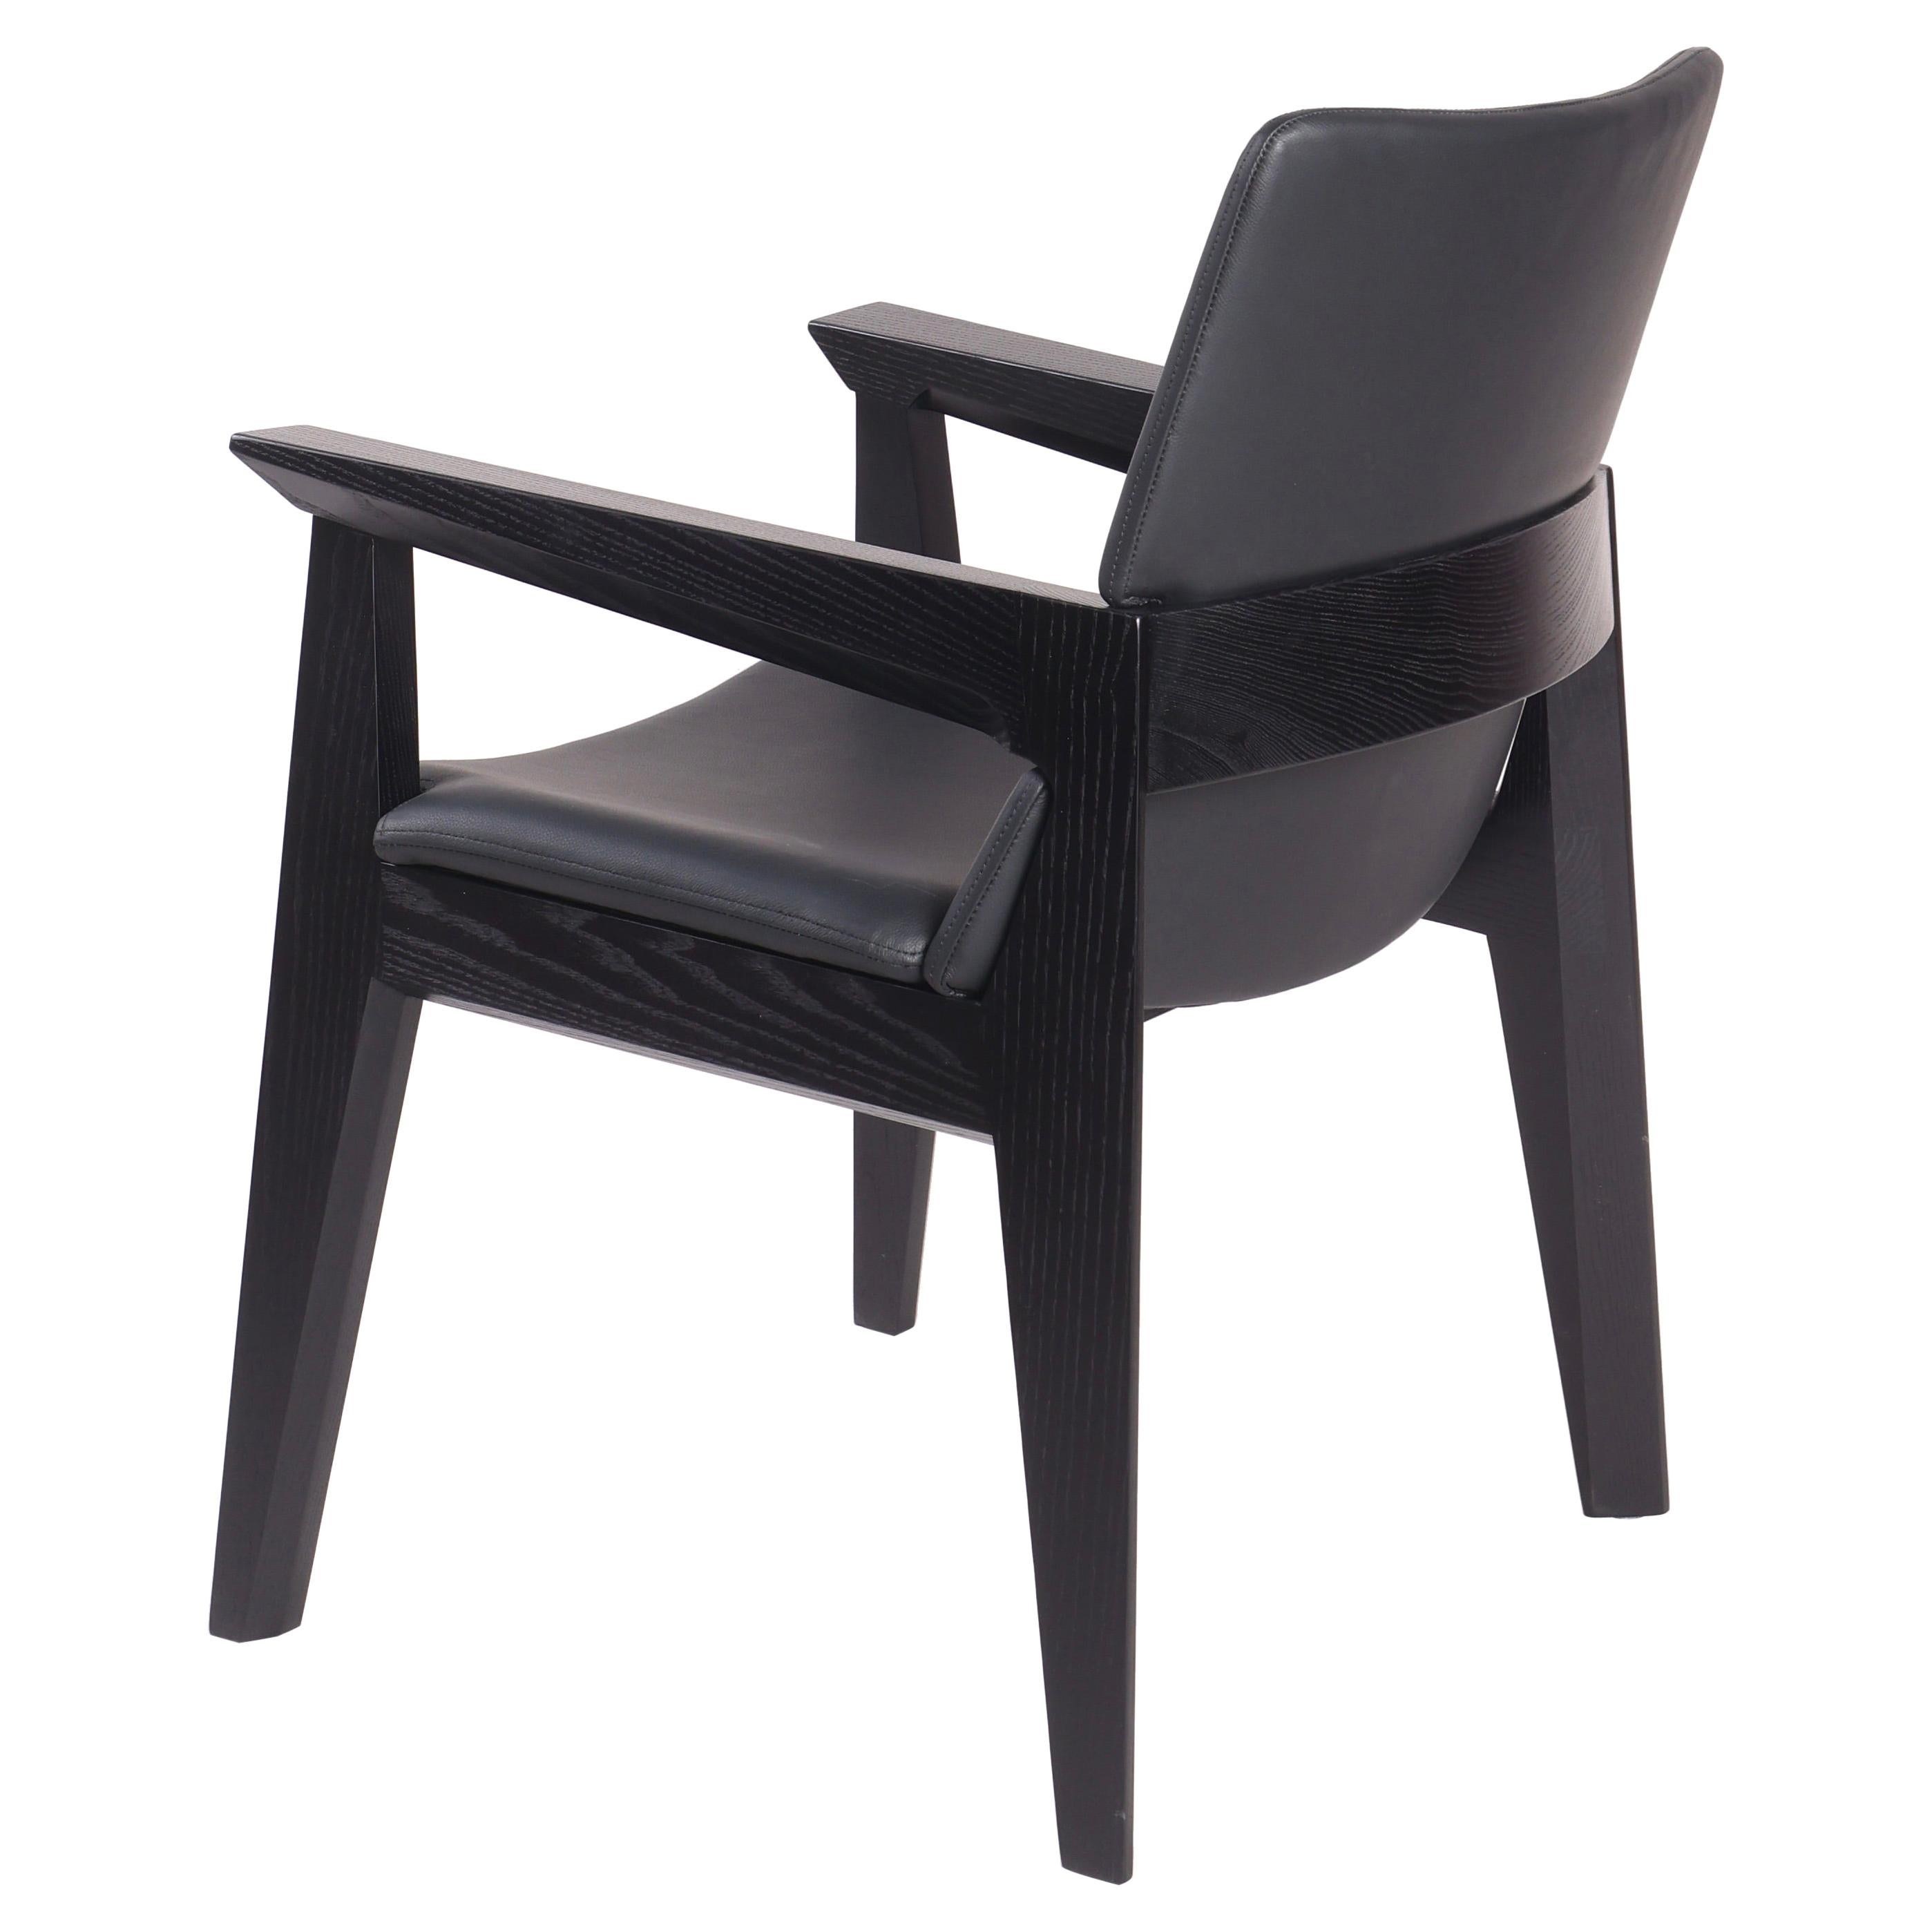 Solid Wood and Leather Arm Chair, Kroft Dining Chair For Sale at 1stDibs